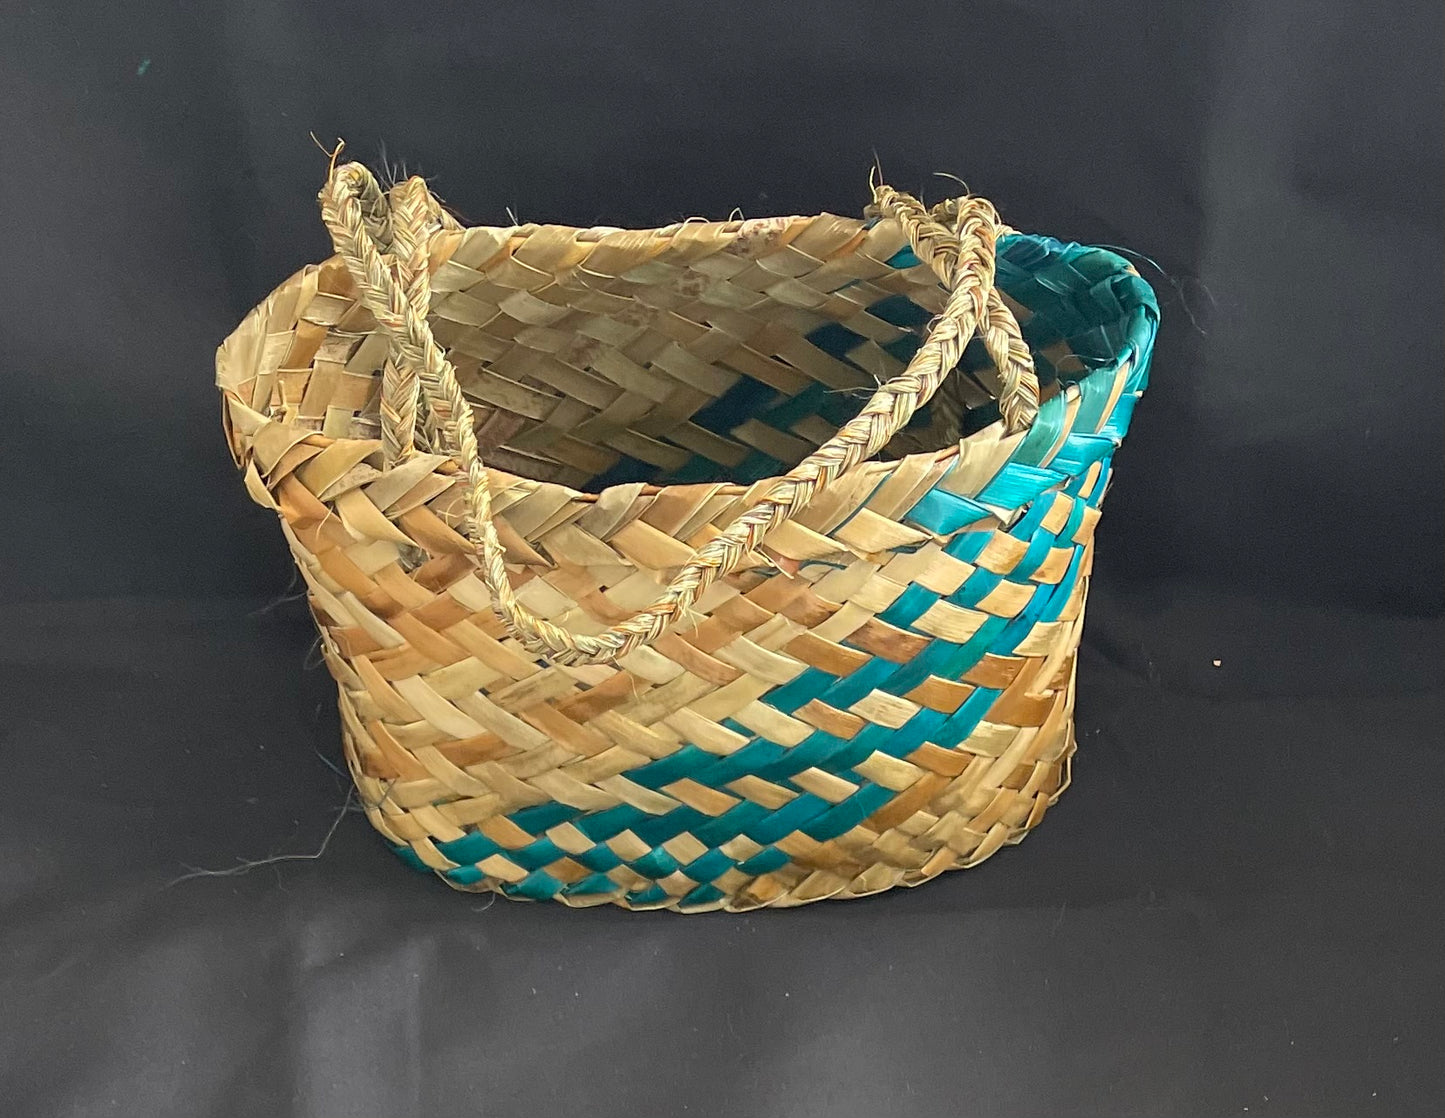 Flax kete turquoise